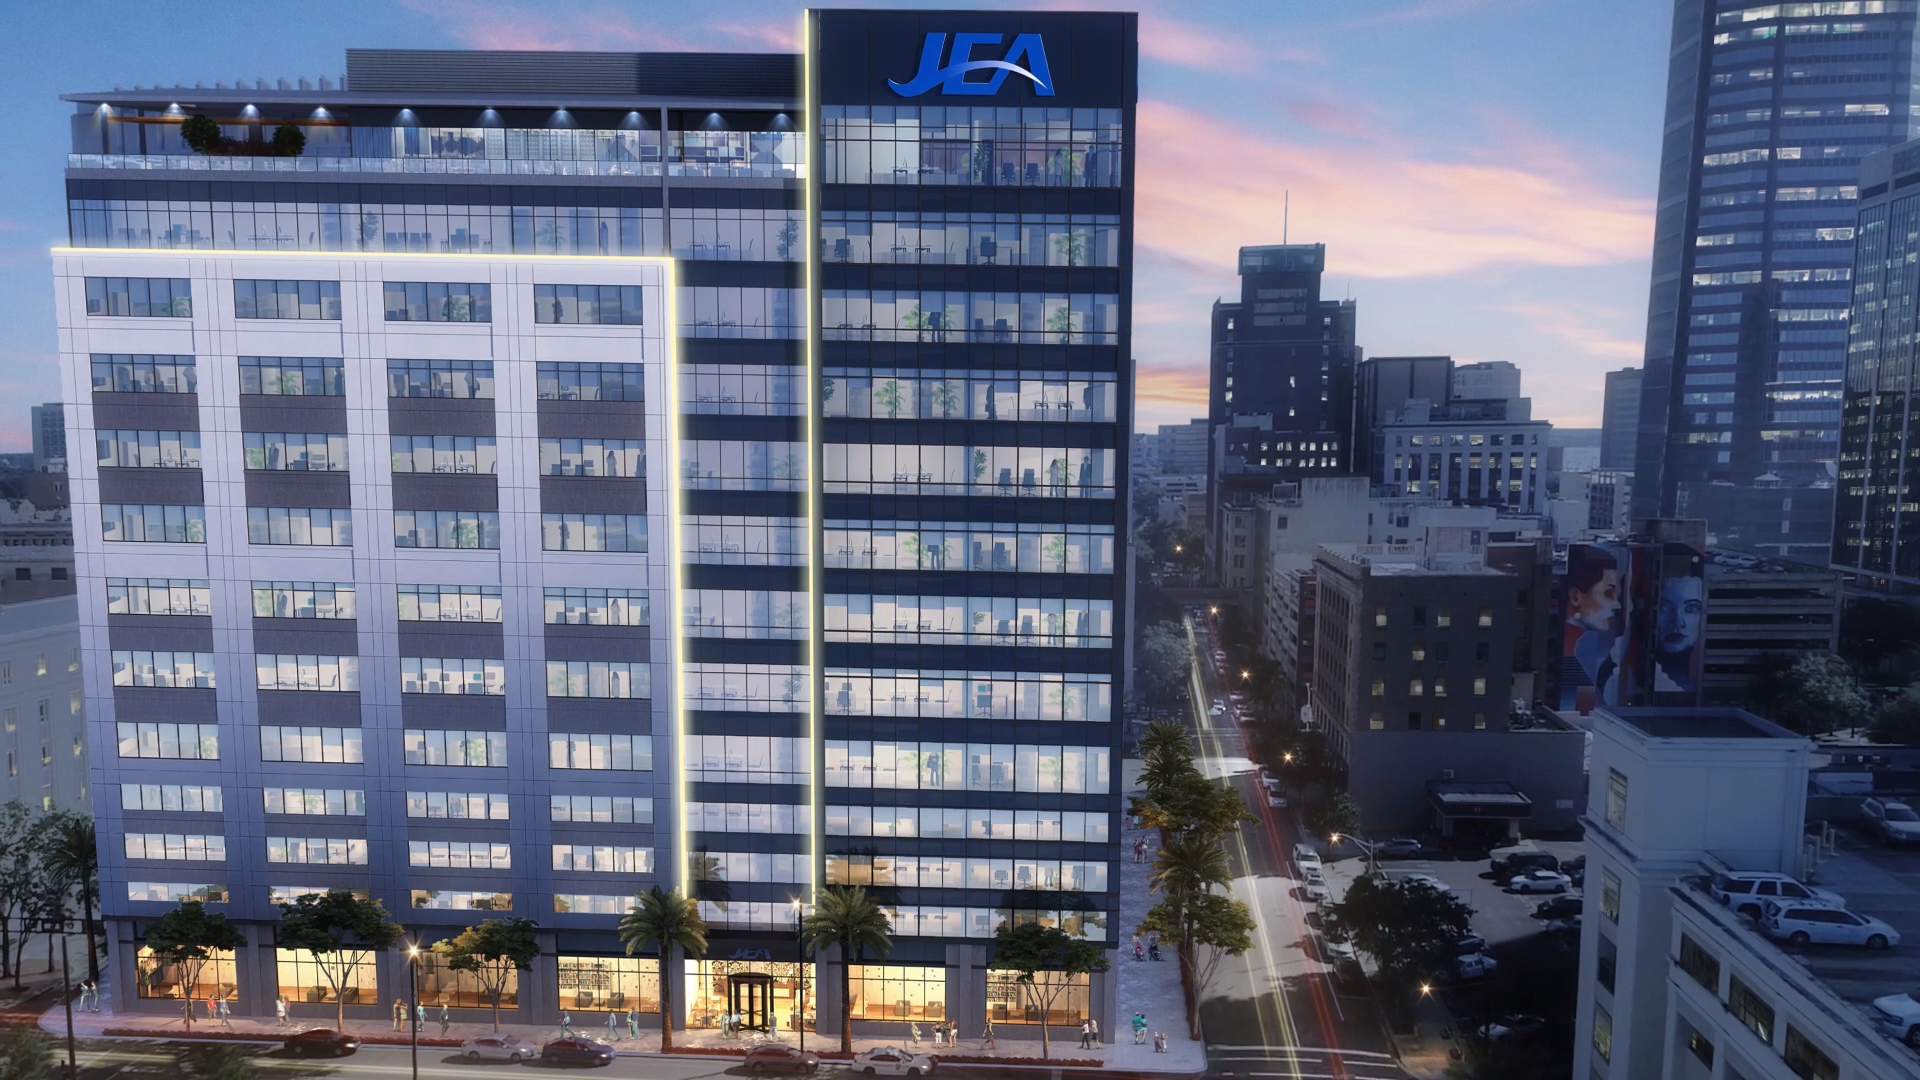 Ryan Companies US Inc. offered three potential Downtown locations for a new headquarters.